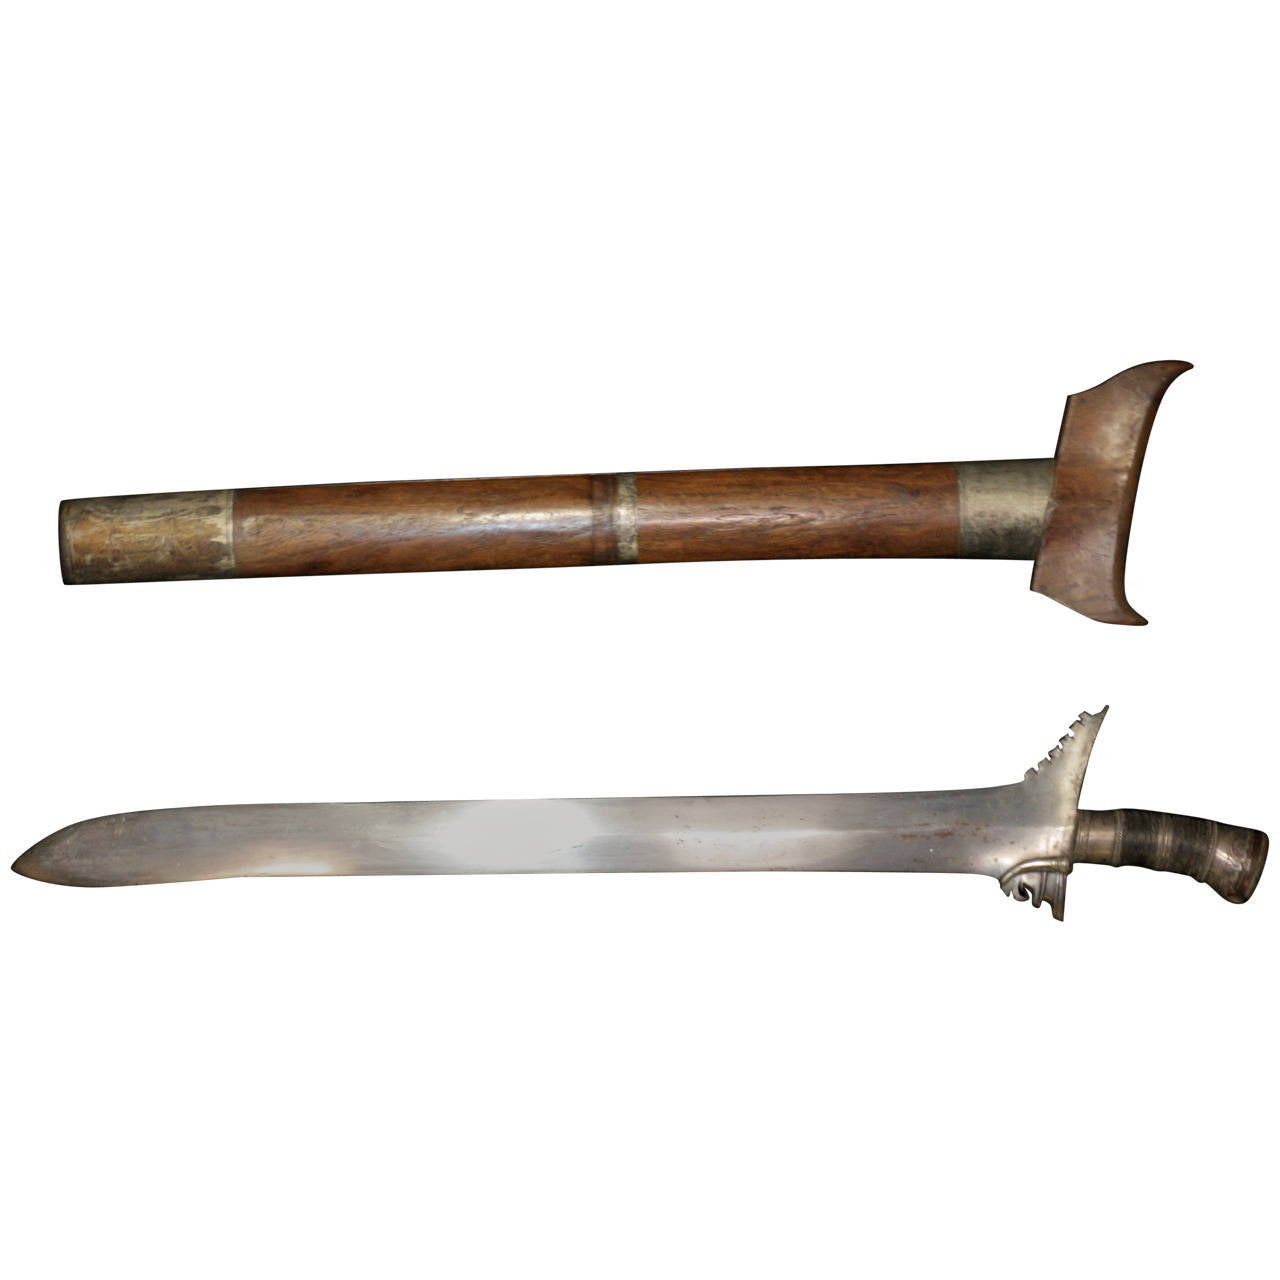 Antique Indonesian Fighting Sword or "Kris" and Scabbard For Sale